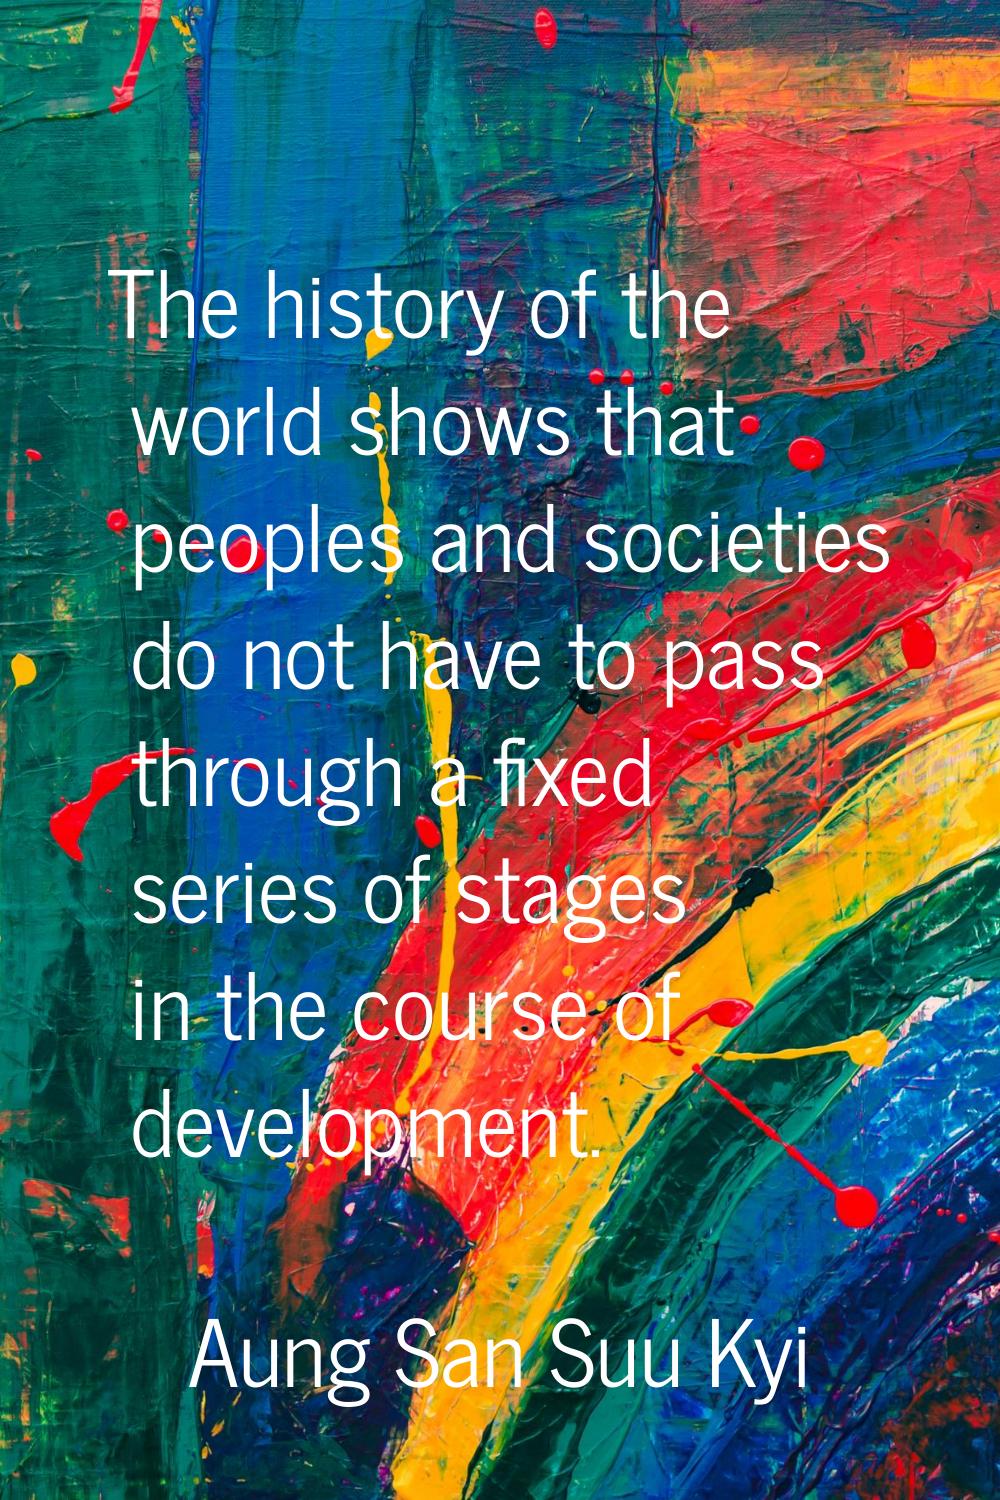 The history of the world shows that peoples and societies do not have to pass through a fixed serie